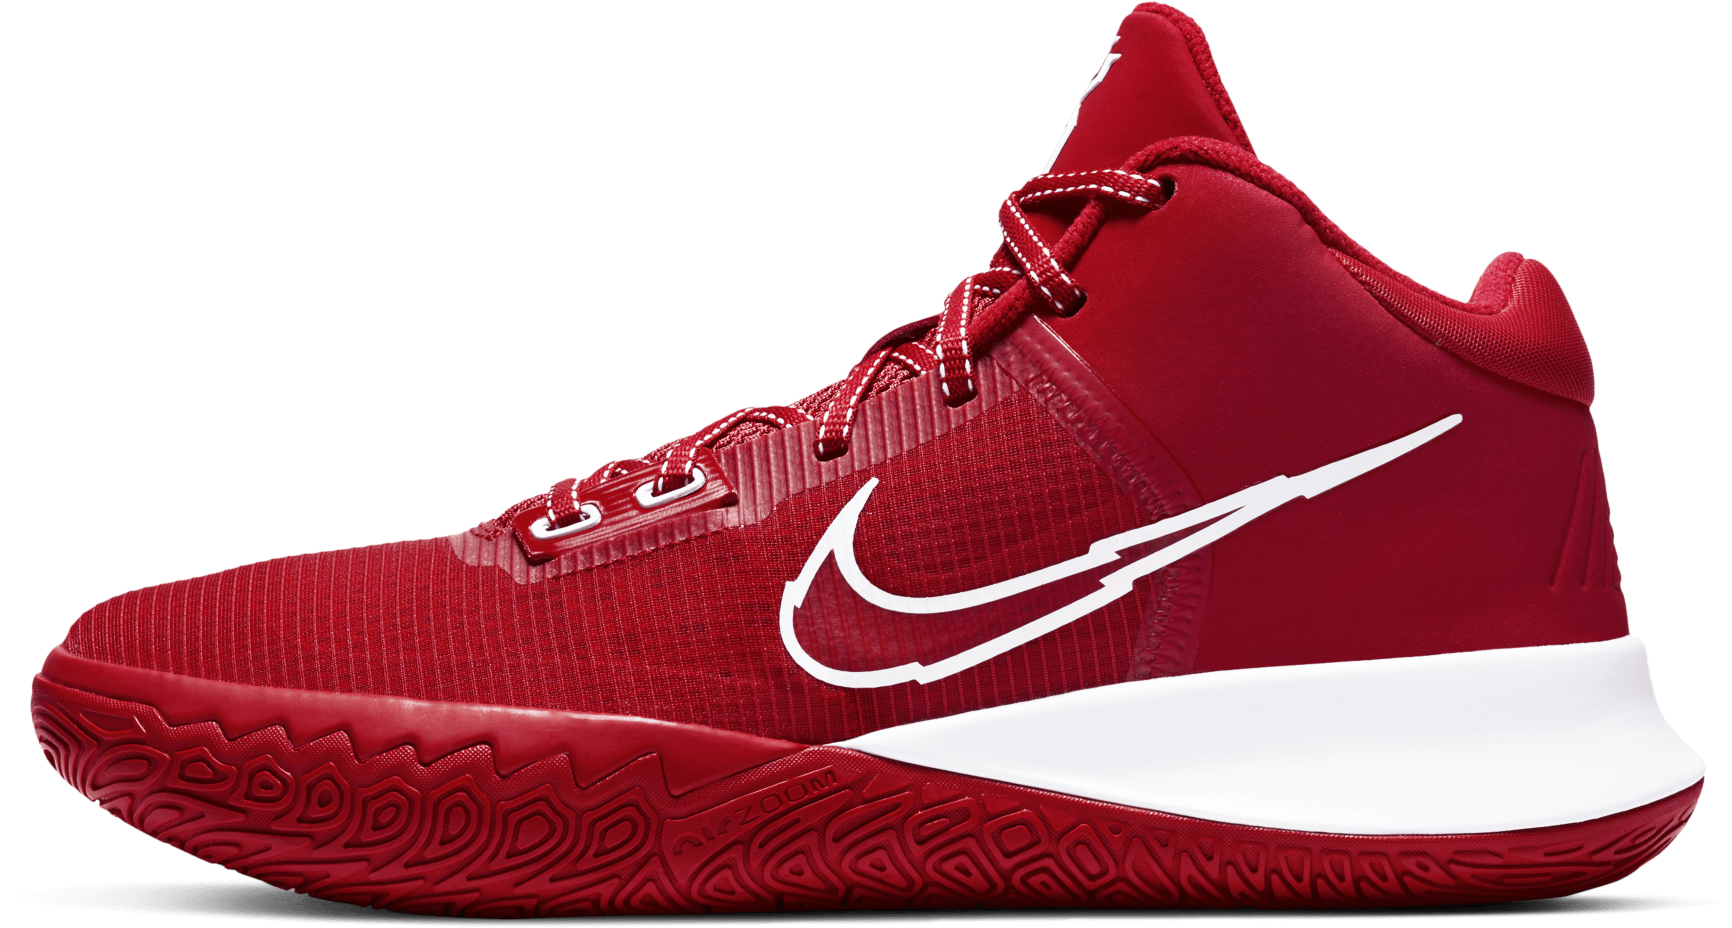 Nike Kyrie Flytrap 4 - Review, Deals, Pics of 15 Colorways